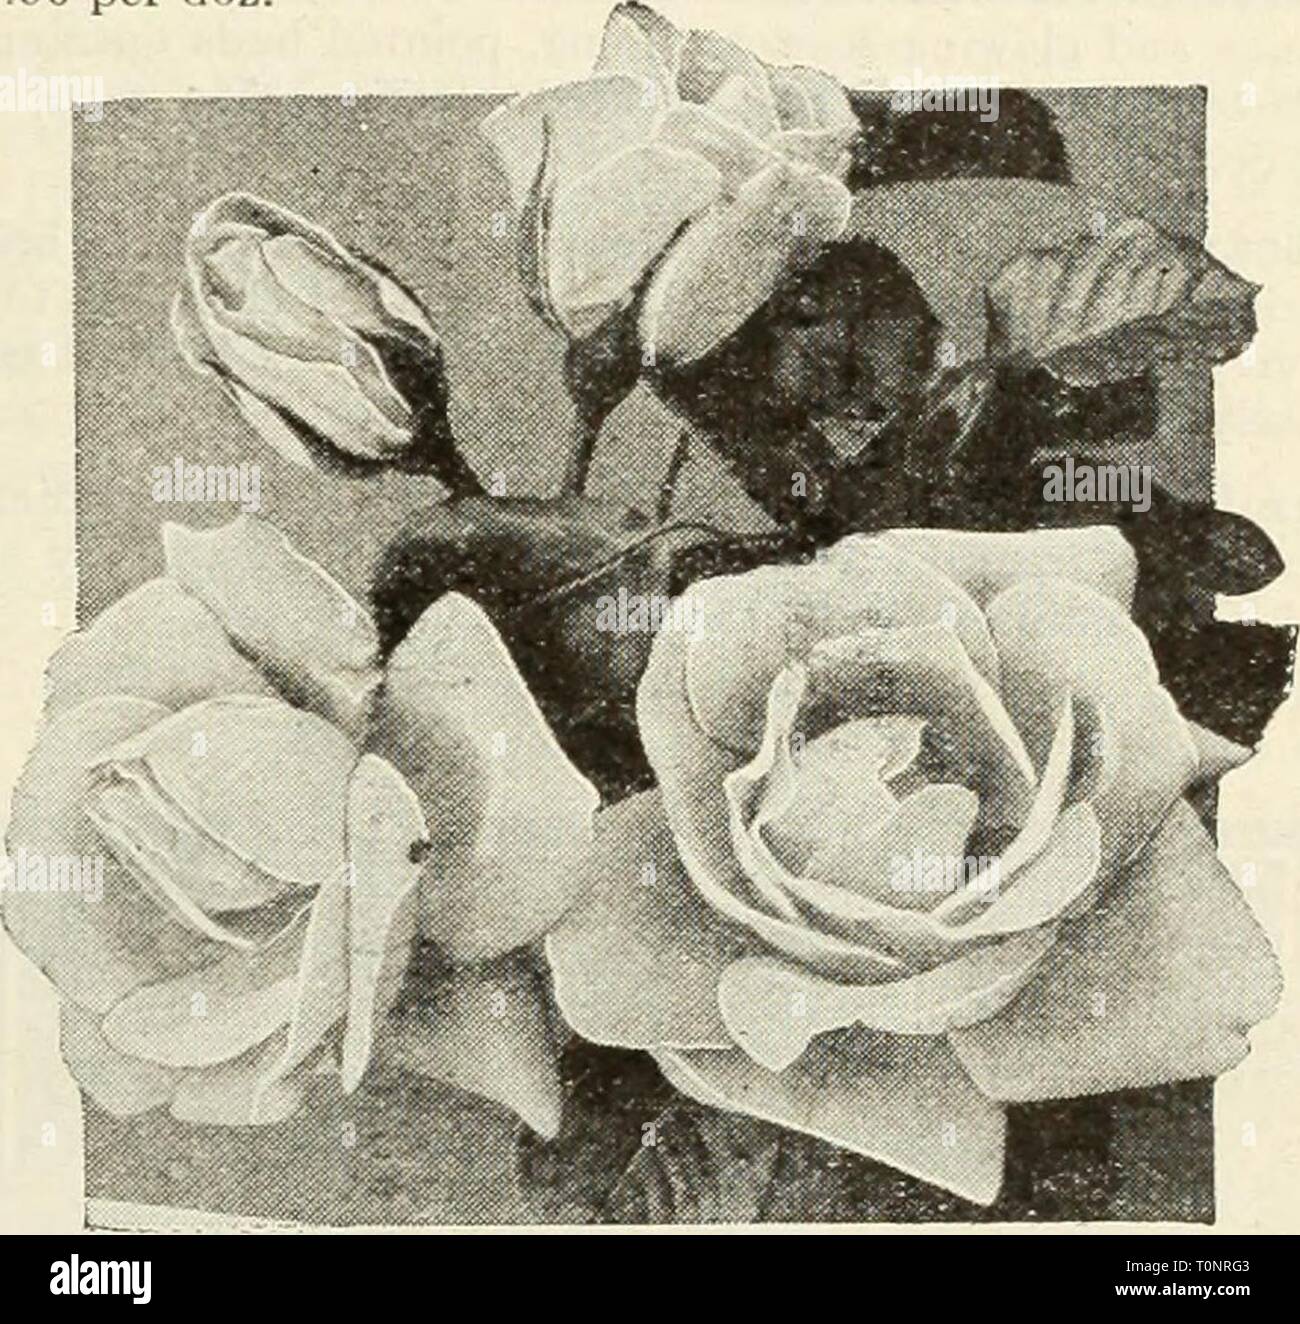 Dreer's autumn catalog of bulbs Dreer's autumn catalog of bulbs plants, shrubs, and seeds for fall planting  dreersautumncata1935henr Year: 1935  Little Beauty Little Beauty Howard & Smith, 1935. Patent Pending. The herald of an entirely new race of everblooming Roses. Splendid for garden display because it combines mass color effect with quantity of blooms borne throughout the season. The color of the formally arranged blooms is a brilliant cerise of wonderful purity. As the flowers pass their prime they assume a pleasing soft deep pink of a warmth that is distinctly attractive. An enchanting Stock Photo